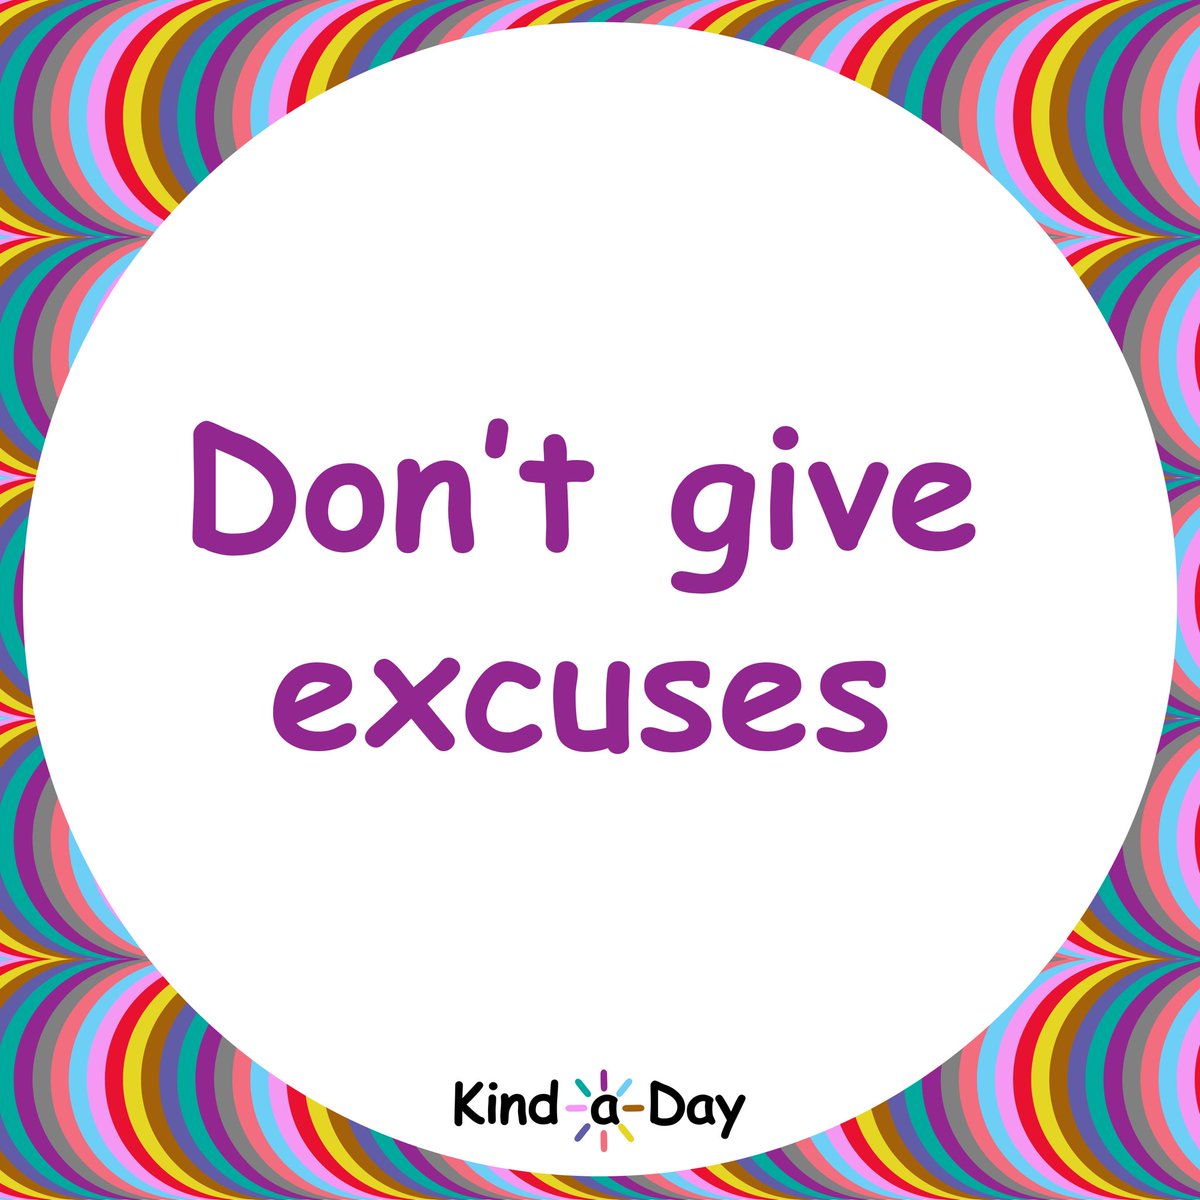 Tuesday Tip: Don’t give excuses 💕
 
#NoExcuses #kind #BeKind #kindness #KindLife #ActsOfKindness #SpreadKindness #KindnessMatters #ChooseKindness #KindnessWins #KindaDay #KindnessAlways #KindnessEveryday #Kindness365 #KindnessChallenge #RandomActsOfKindness